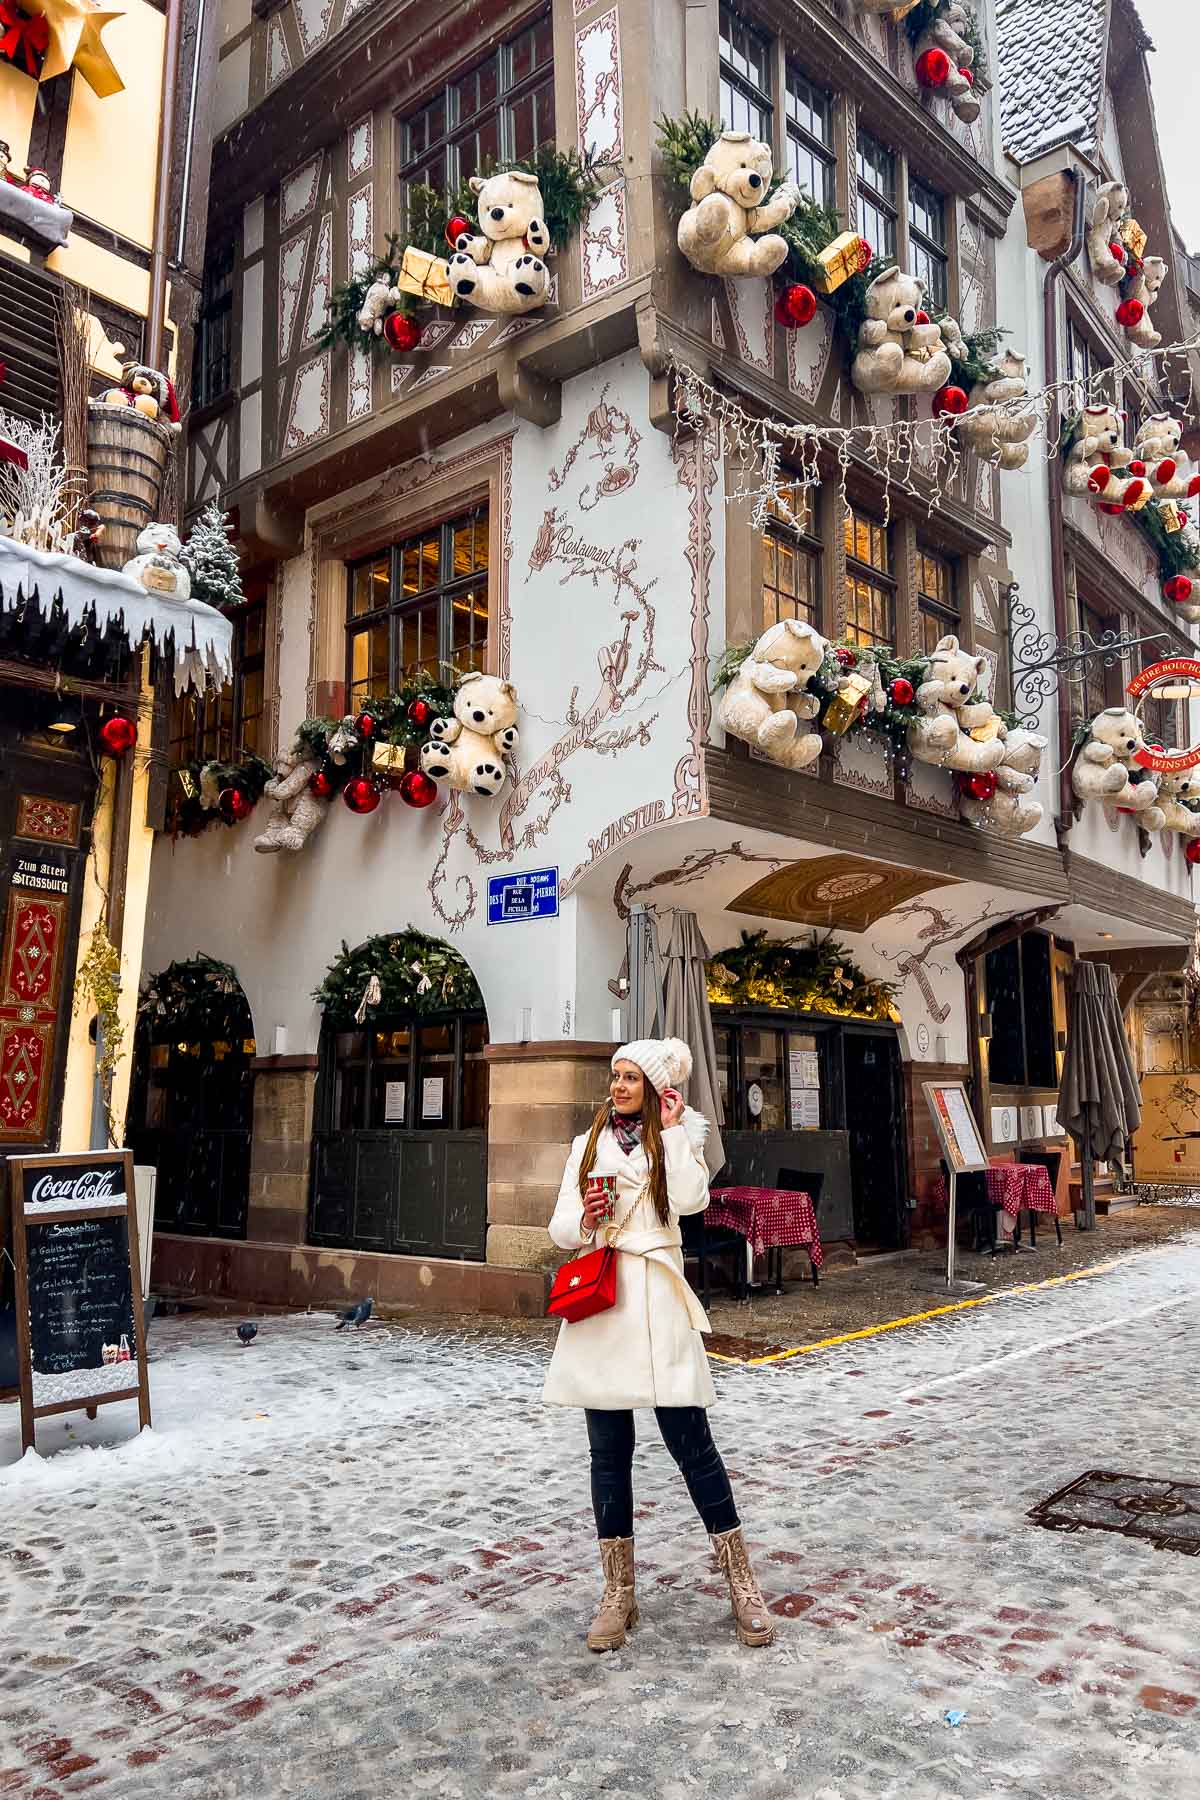 Girl in front of the Teddy bear house in Strasbourg in Christmas